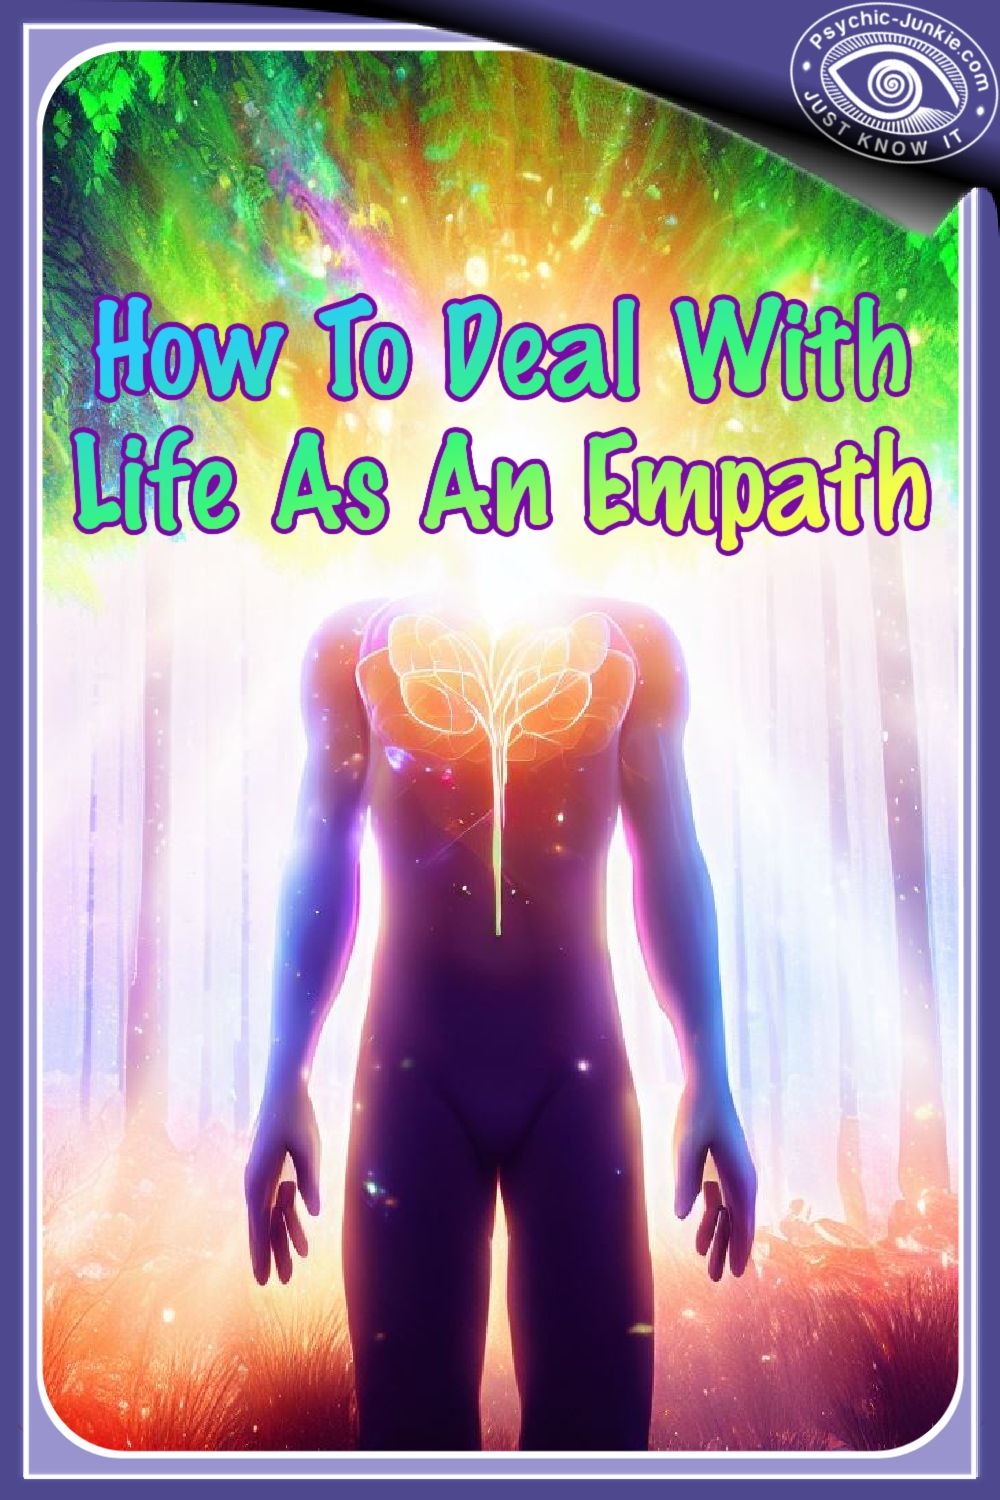 How To Deal With Life As An Empath